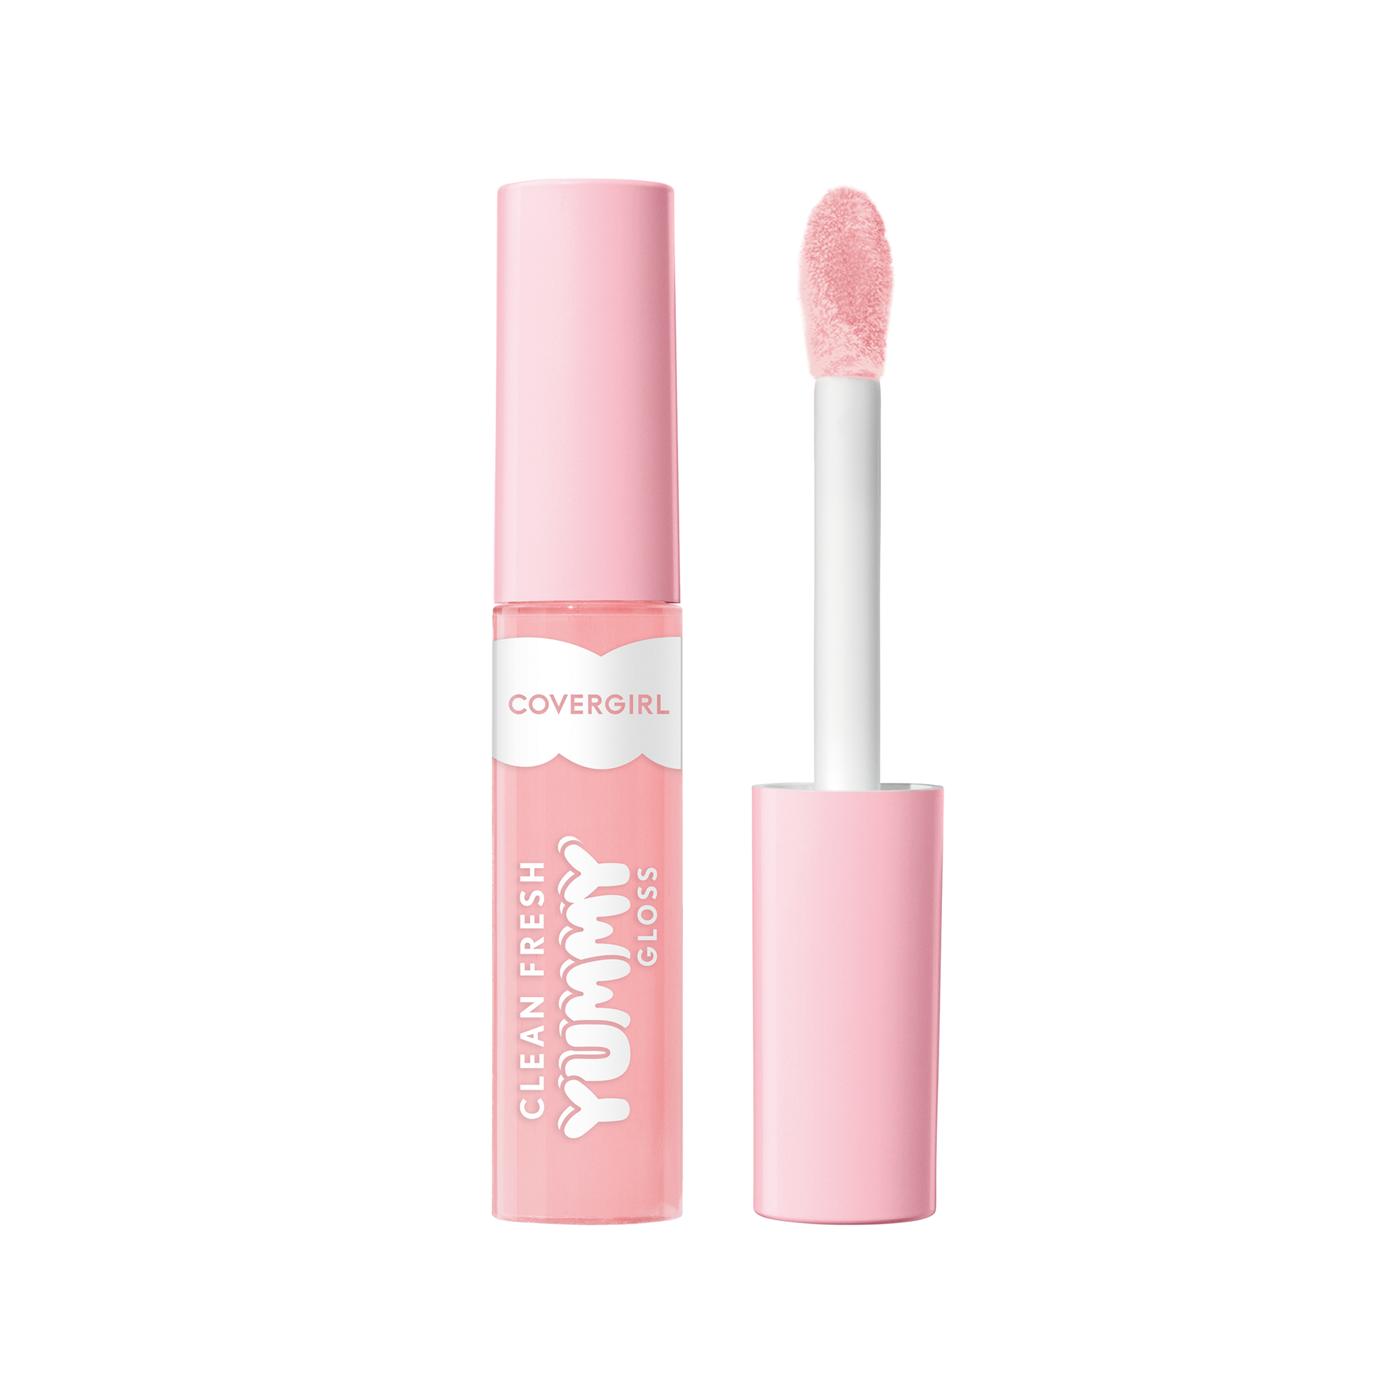 Covergirl Clean Fresh Yummy Lip Gloss - Coconuts About You; image 1 of 10